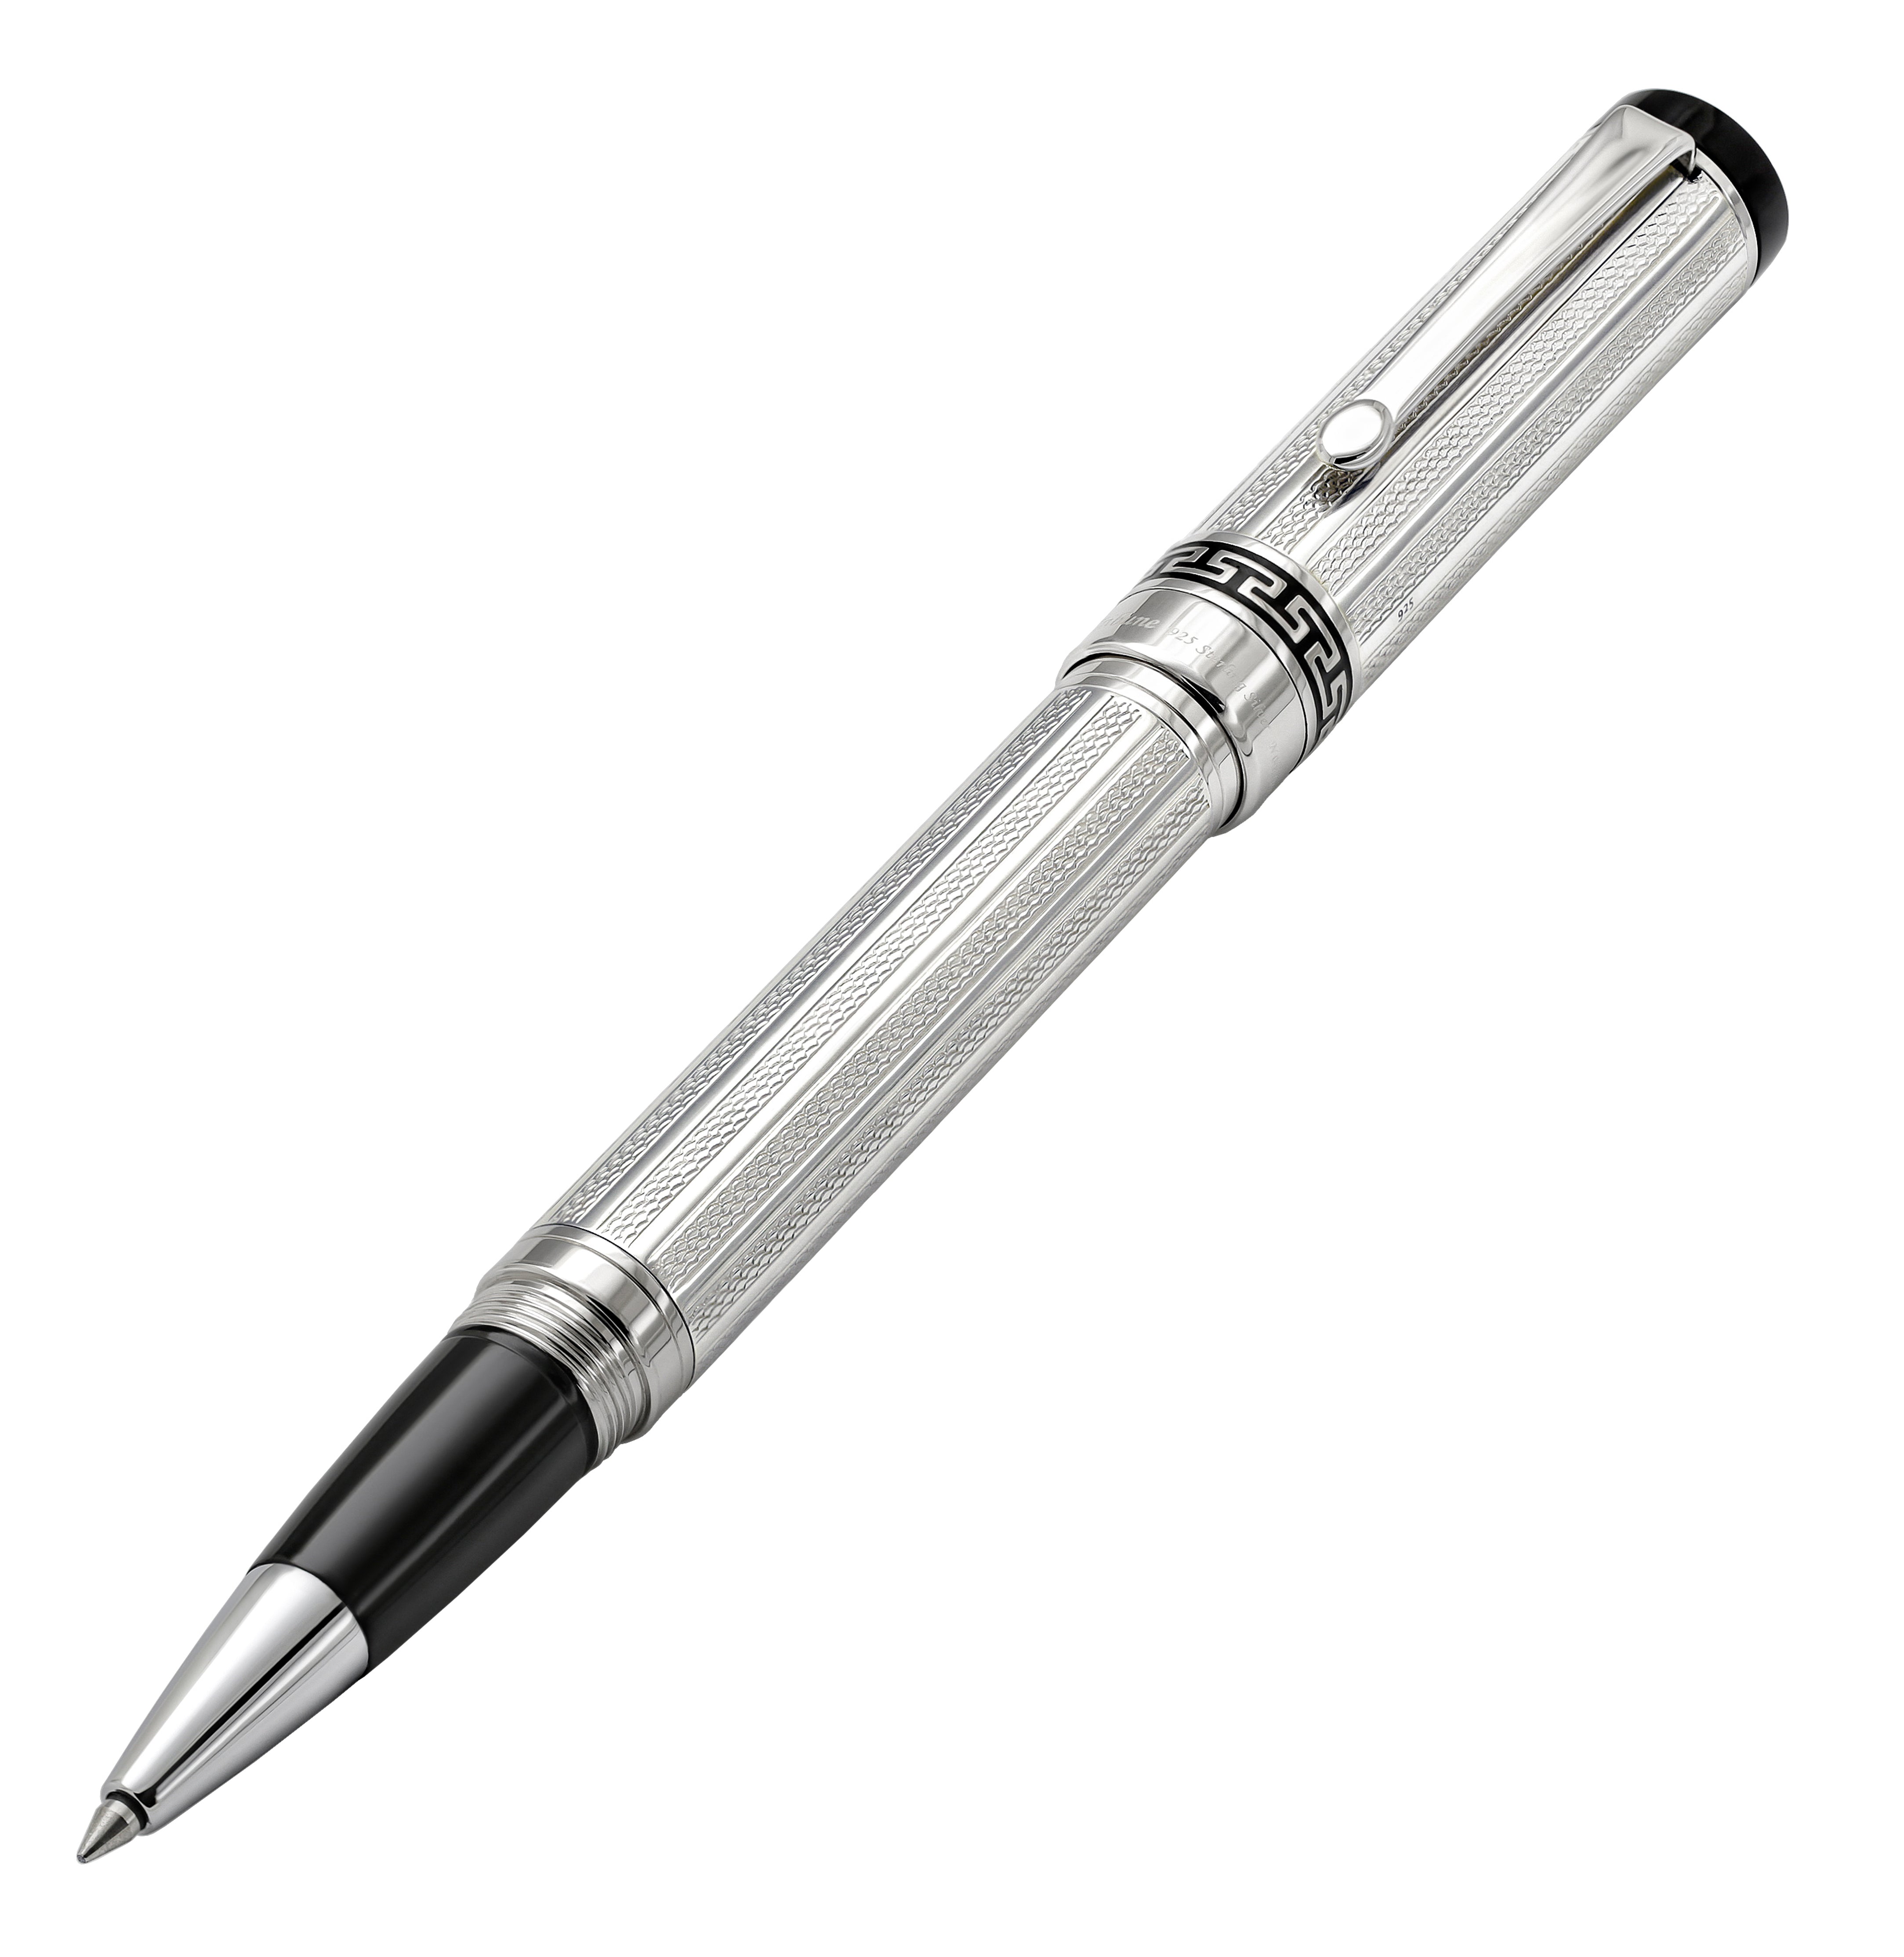 Tribune 925 Sterling Silver Guilloche Engraved Rollerball Pen